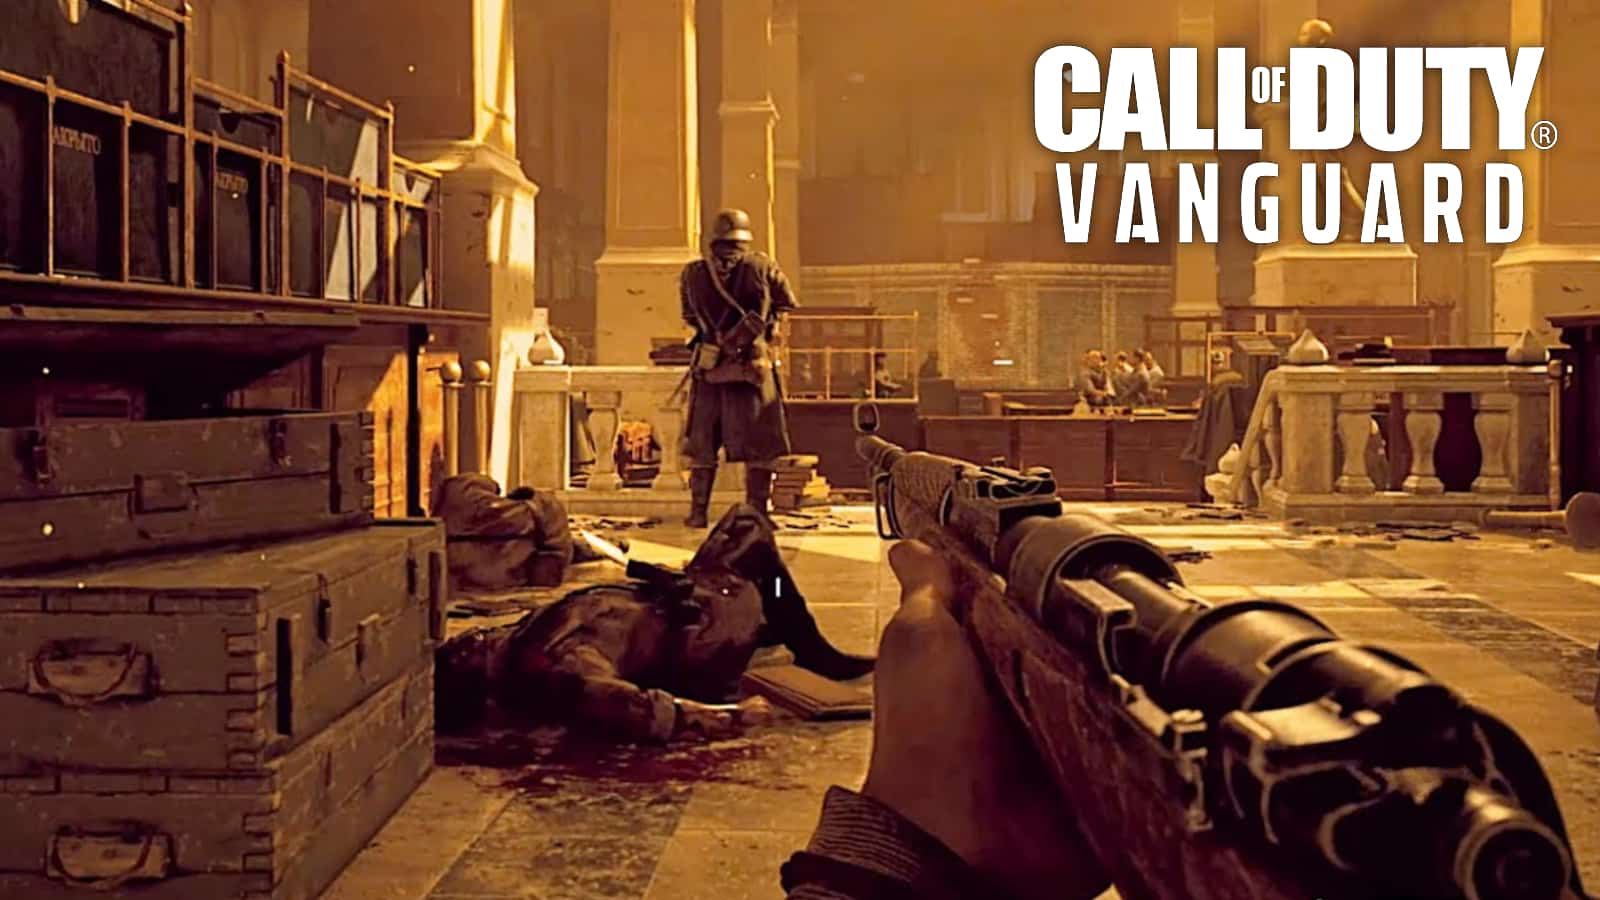 CoD Vanguard players demand fix for packet bursts making game “unplayable”